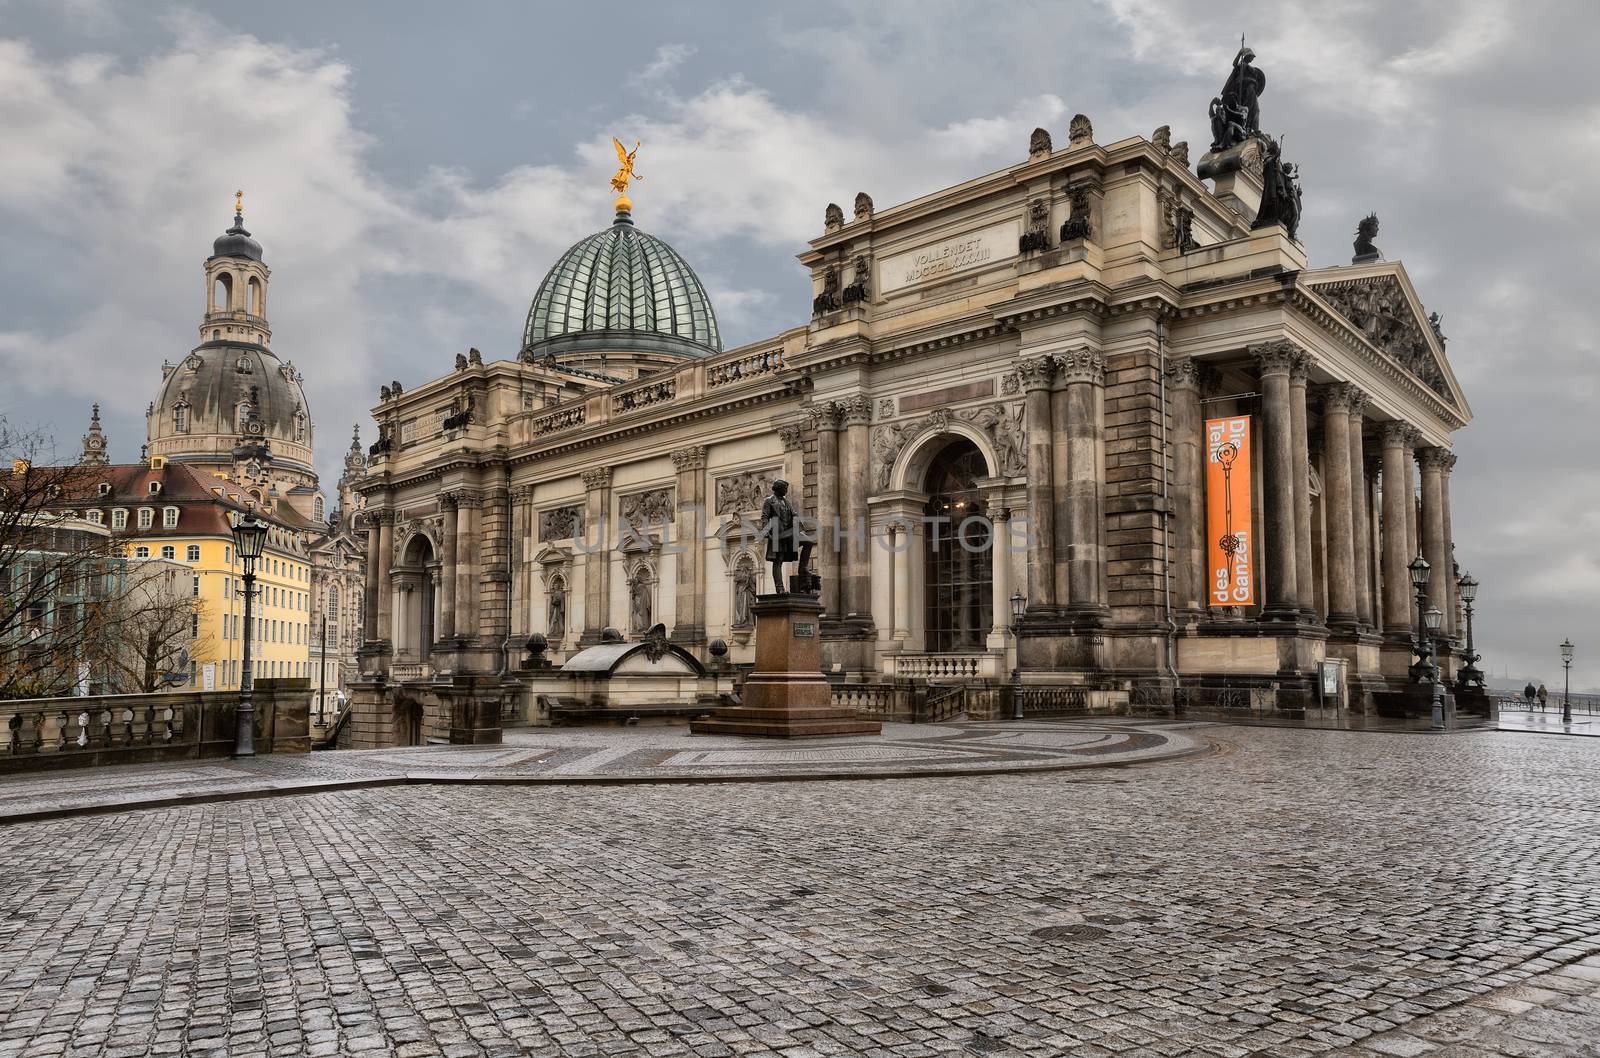 The Dresden Academy of Fine Arts is a vocational university of visual arts located in Dresden, Germany.